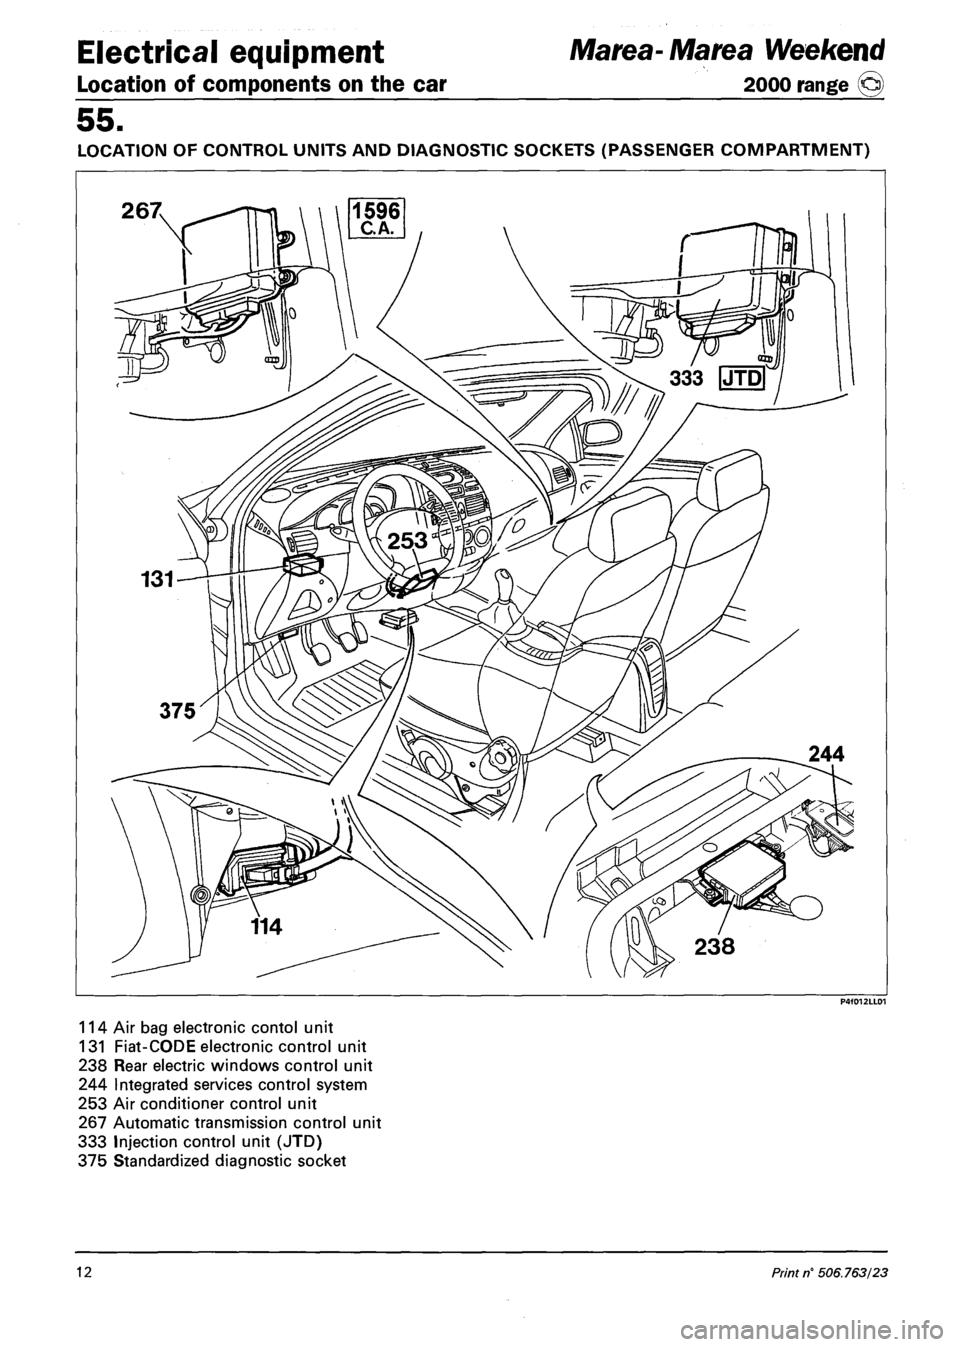 FIAT MAREA 2000 1.G Workshop Manual Electrical equipment Marea-Marea Weekend 
Location of components on the car 2000 range © 
55. 
LOCATION OF CONTROL UNITS AND DIAGNOSTIC SOCKETS (PASSENGER COMPARTMENT) 
P4f012LL01 
114 Air bag electr